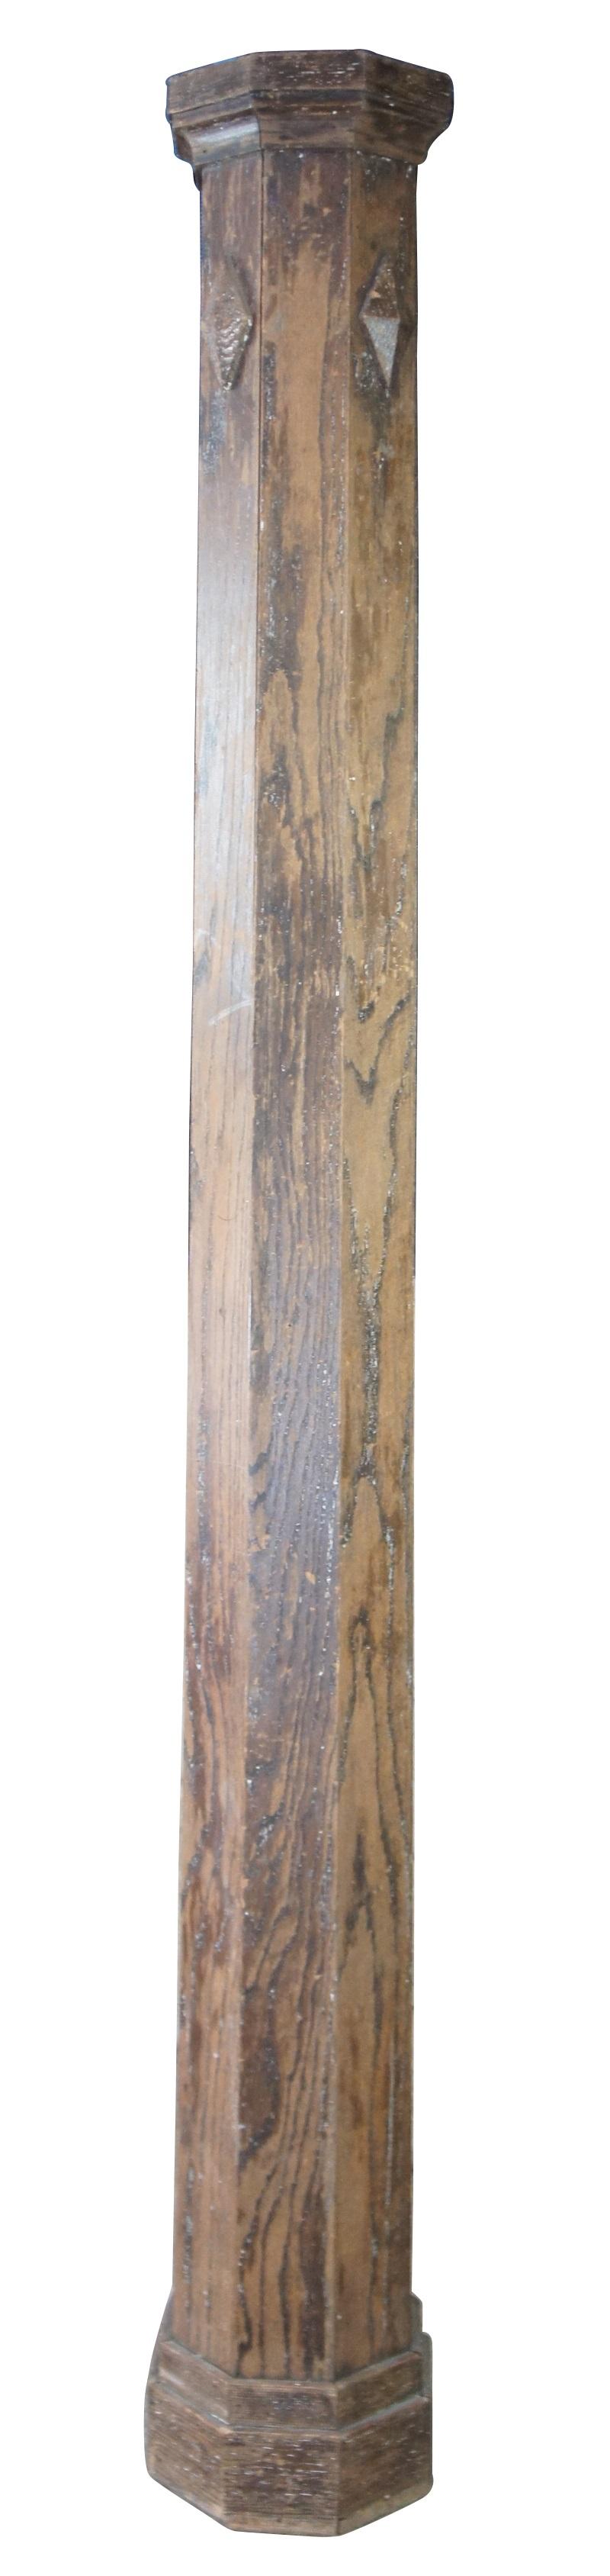 20th century relaimed architectural column or pillar. Made of oak, featuring eight sides with a slight taper from bottom to top and accented with diamond embellishment carvings. Measure: 96